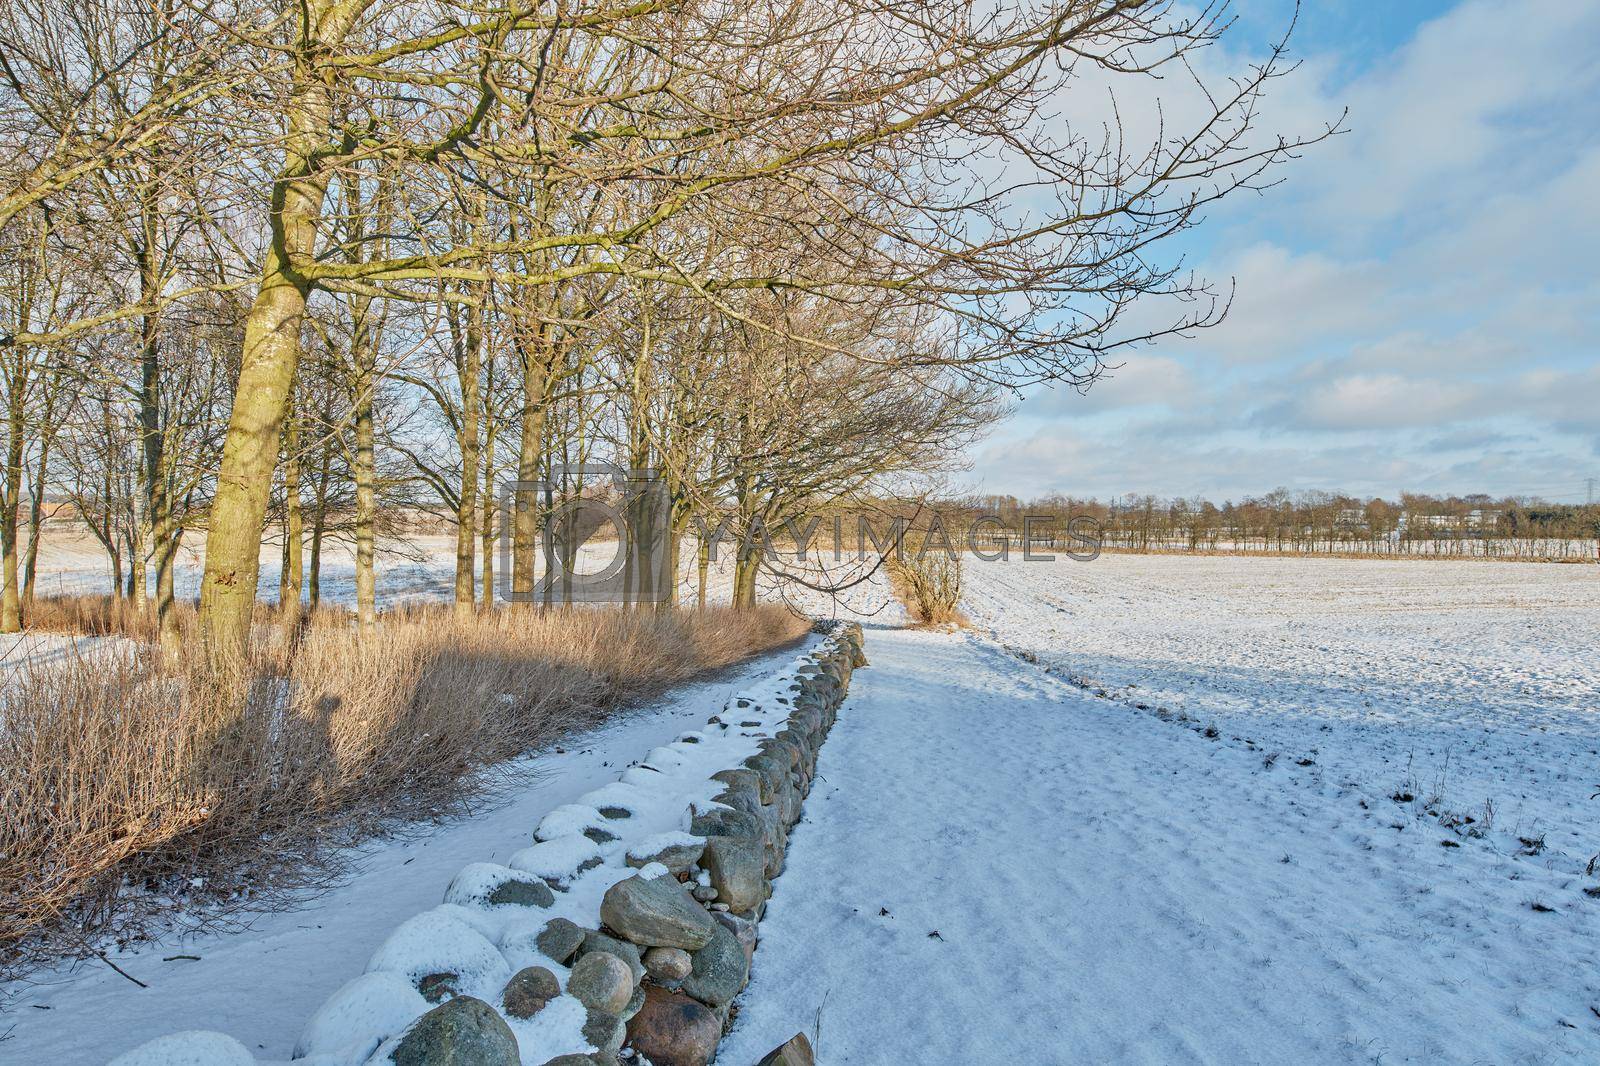 Wintertime - countryside in Denmark. Winter landscape on a sunny day with blue sky